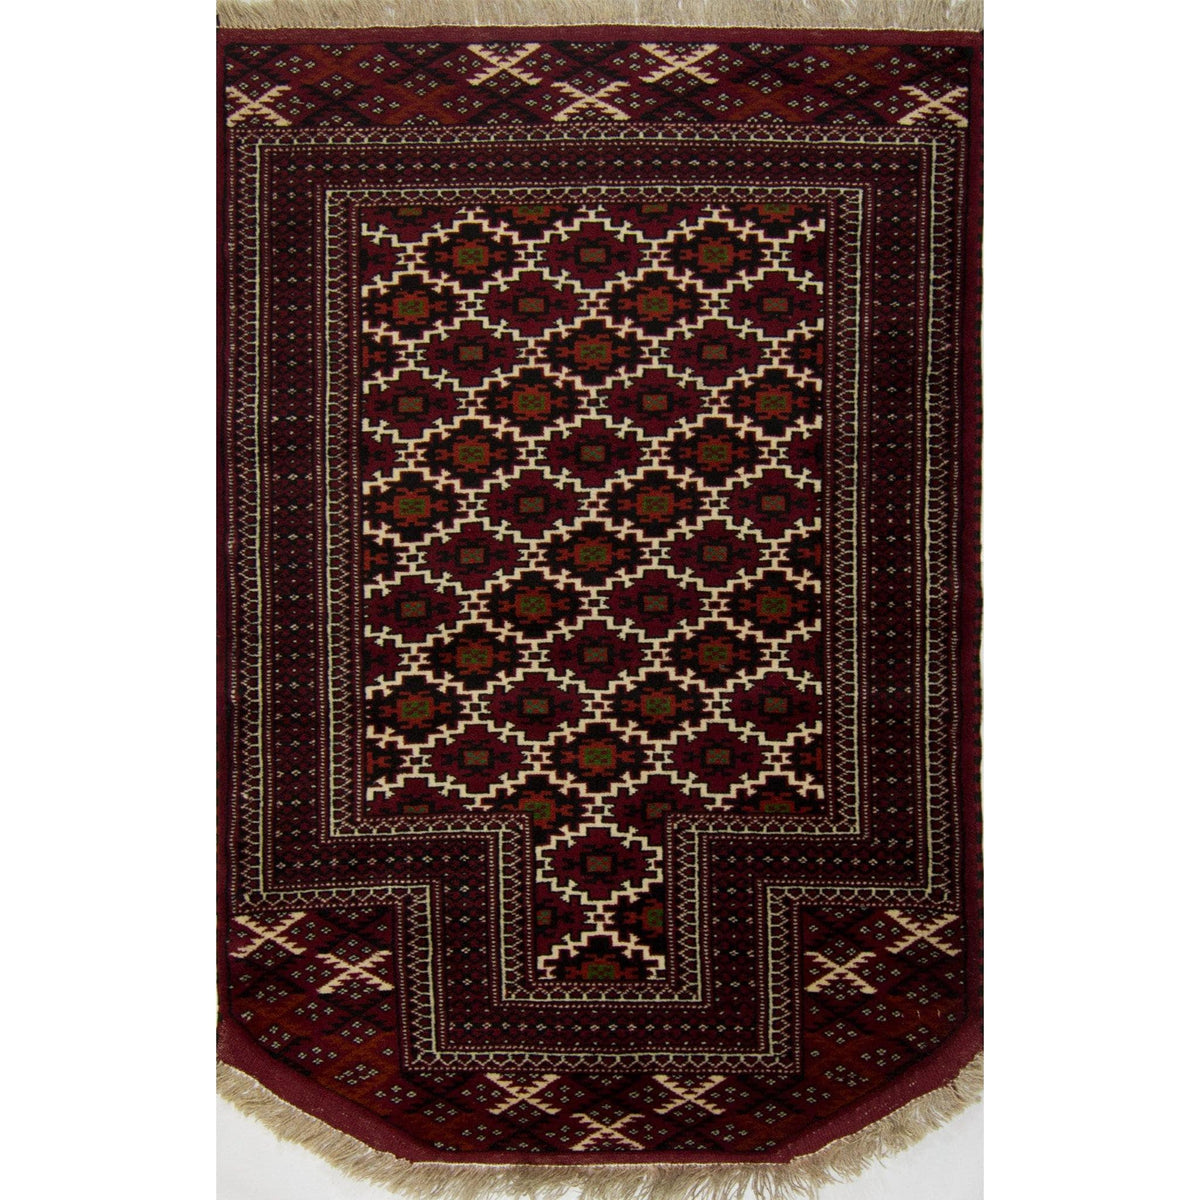 Fine Hand-knotted Wool Persian Baluchi Rug 95cm x 137cm